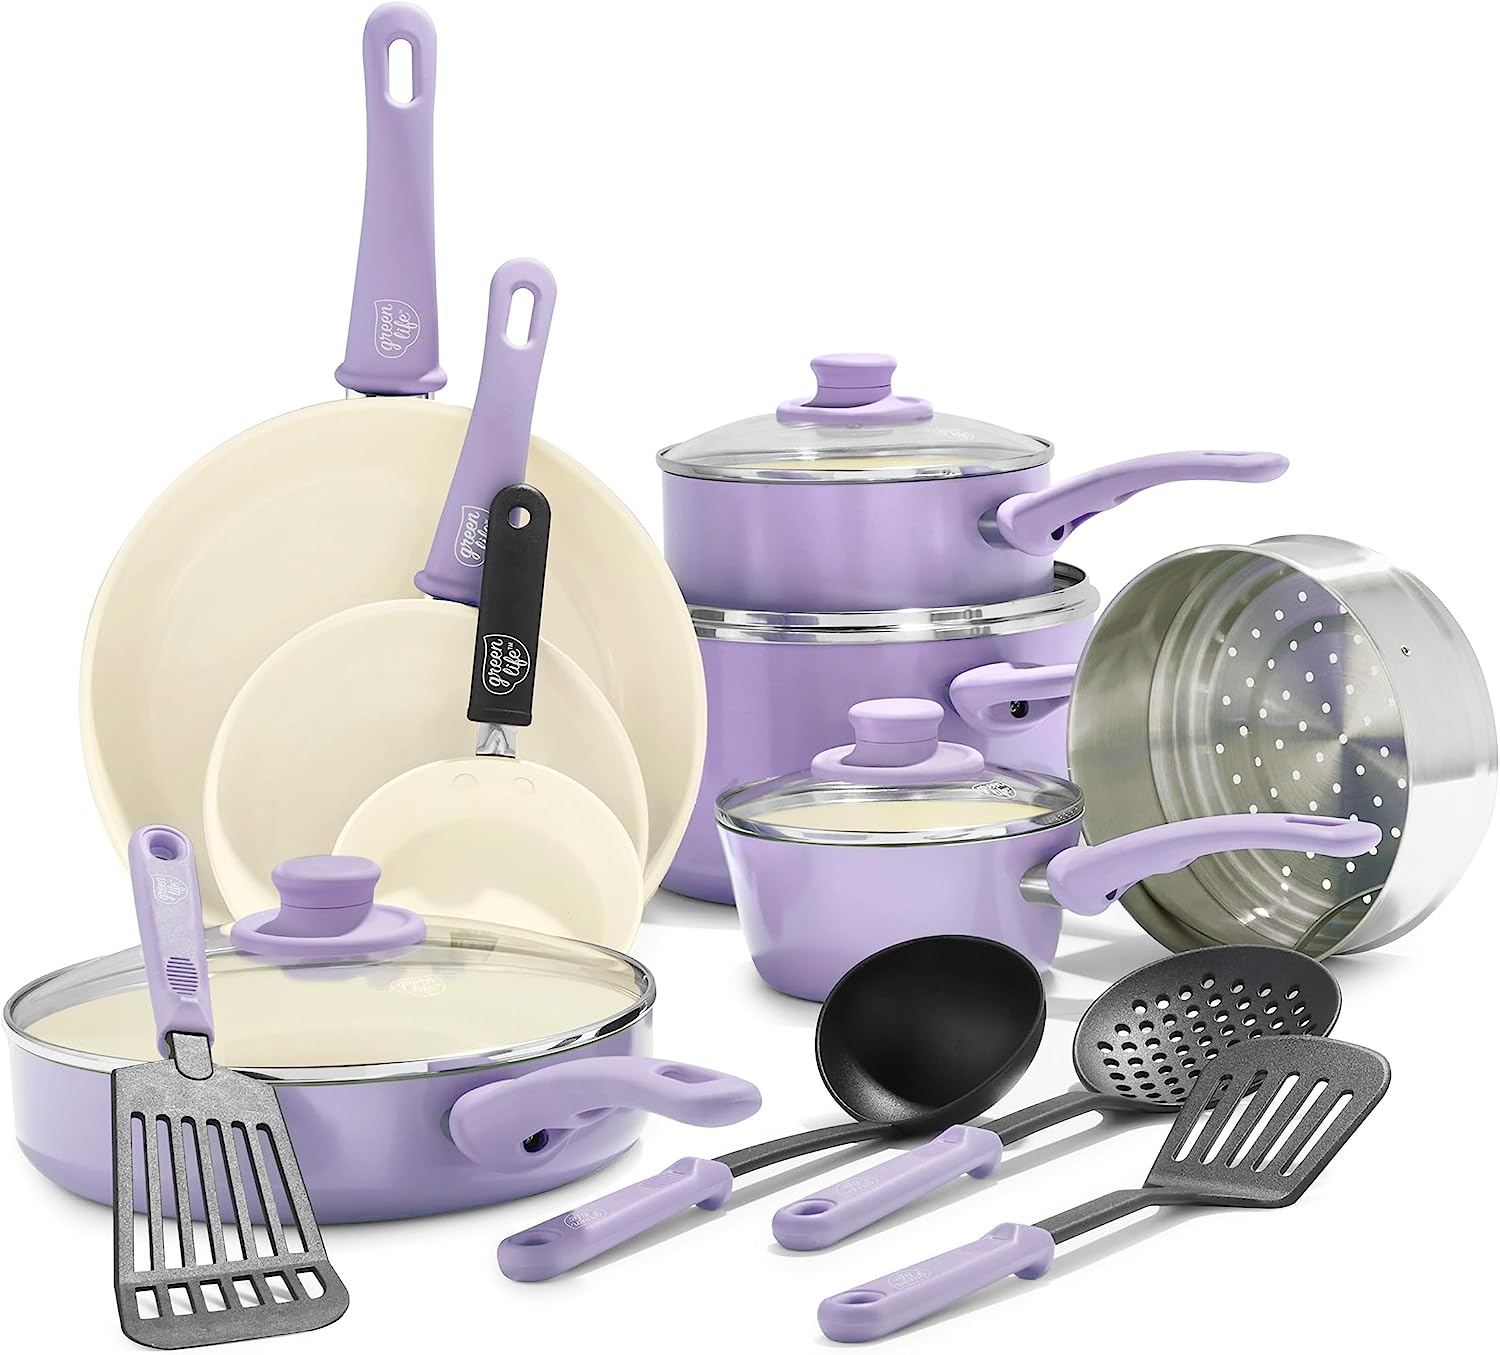 GreenLife Soft Grip Healthy Ceramic Nonstick 16 Piece Kitchen Cookware Pots and Frying Sauce Saute Pans Set, PFAS-Free with Kitchen Utensils and Lid, Dishwasher Safe, Lavender 16 Piece Cookware Set Lavender - image 1 of 8